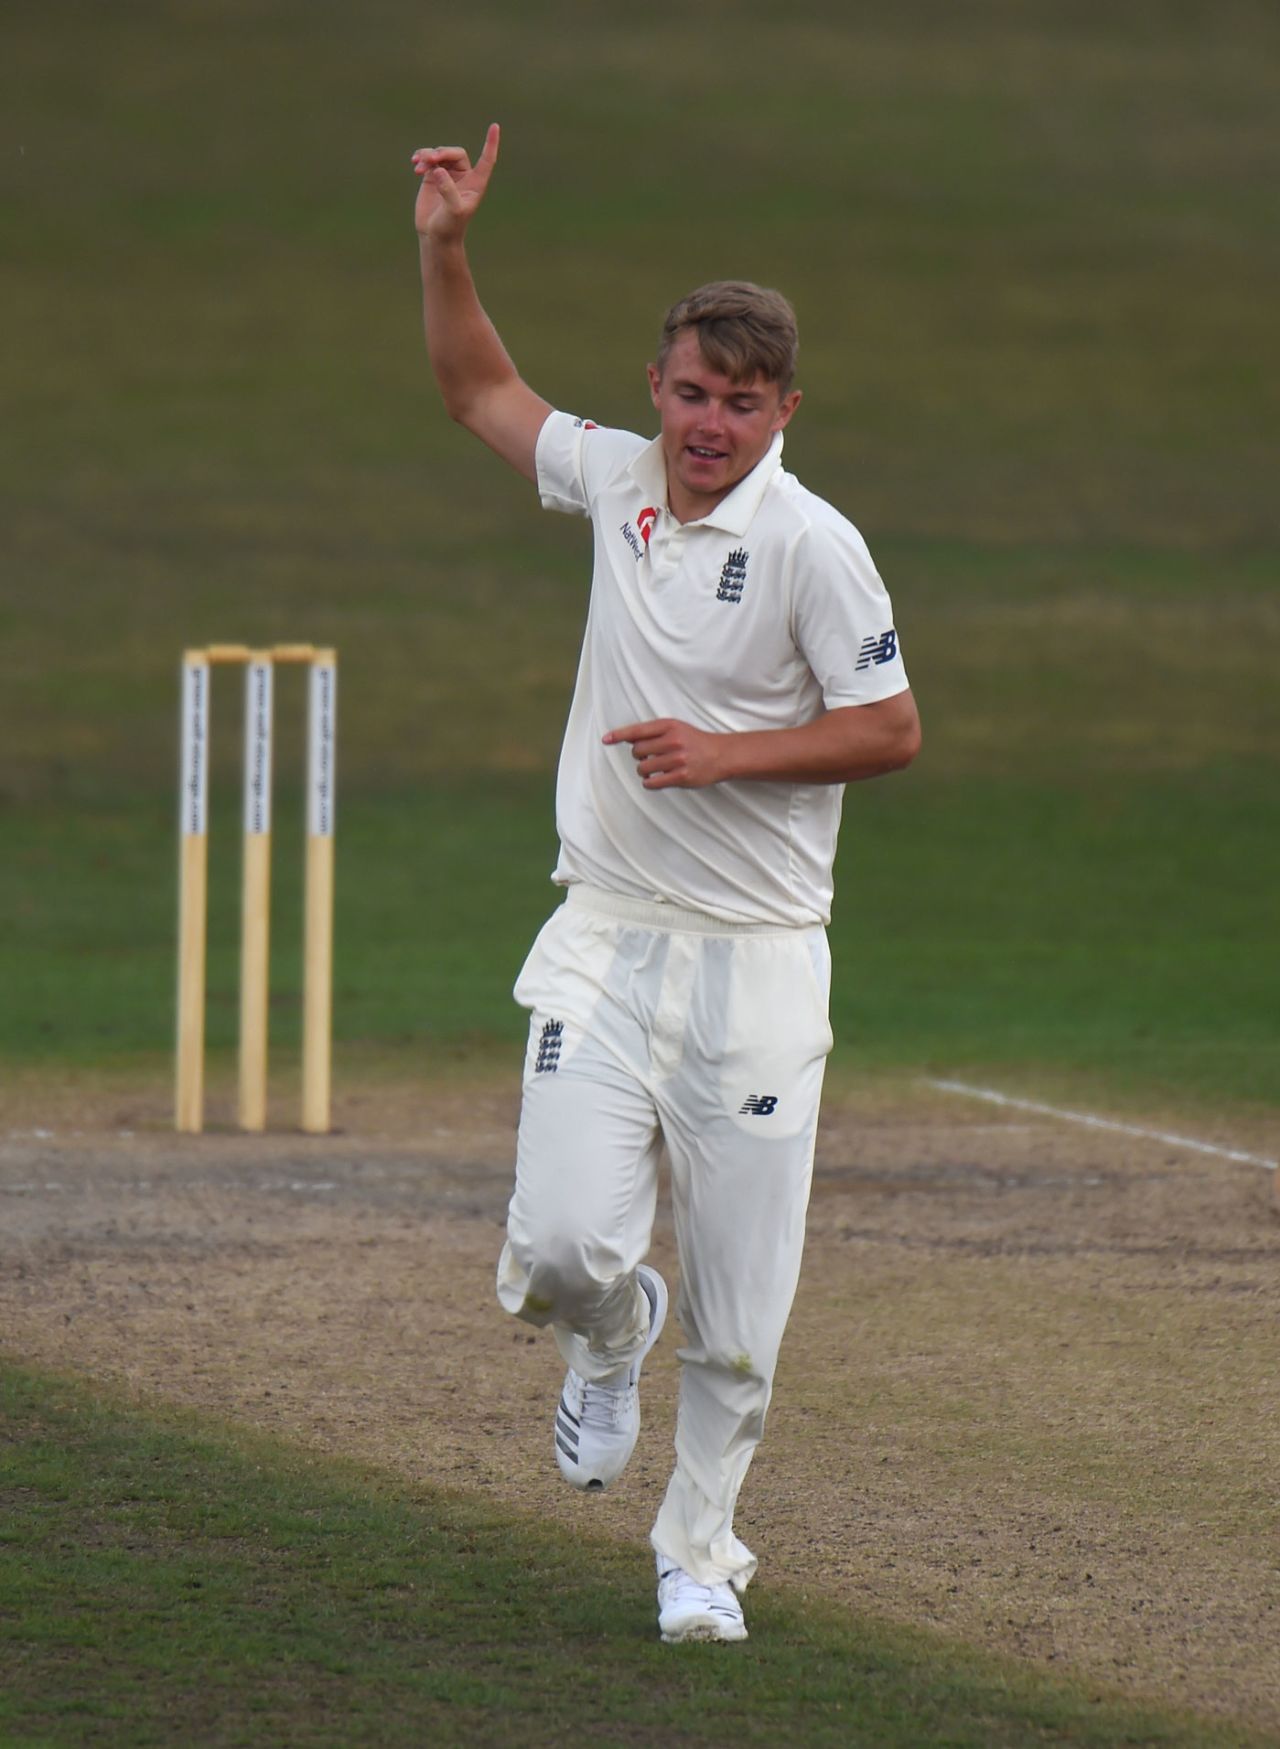 Sam Curran picked up a five-for as India A were bundled out, England Lions v India A, Worcester, July 18, 2018